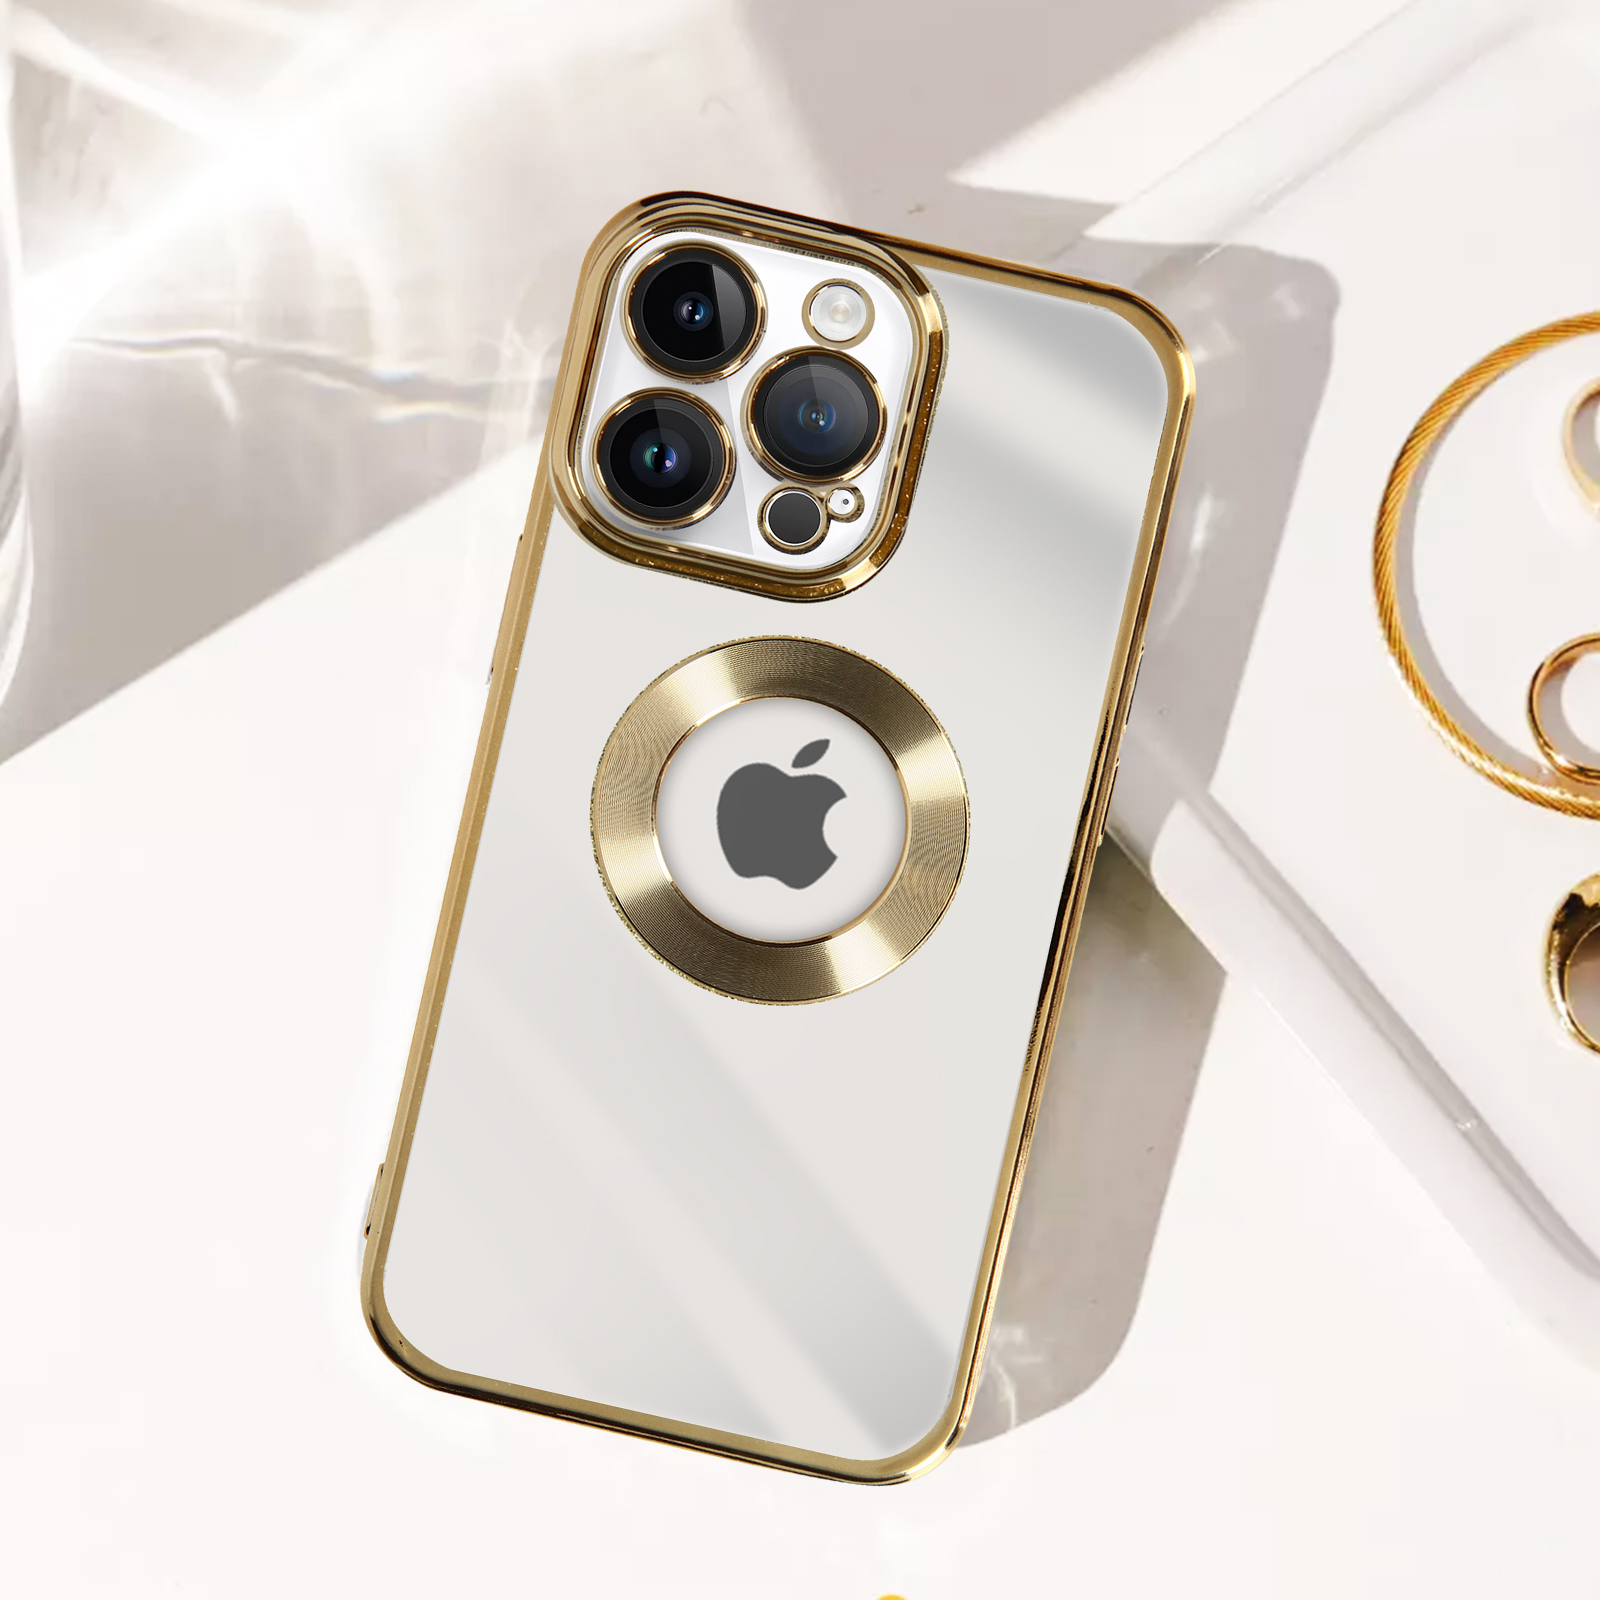 14 Apple, Pro Backcover, iPhone Protecam Gold AVIZAR Spark Series, Max,